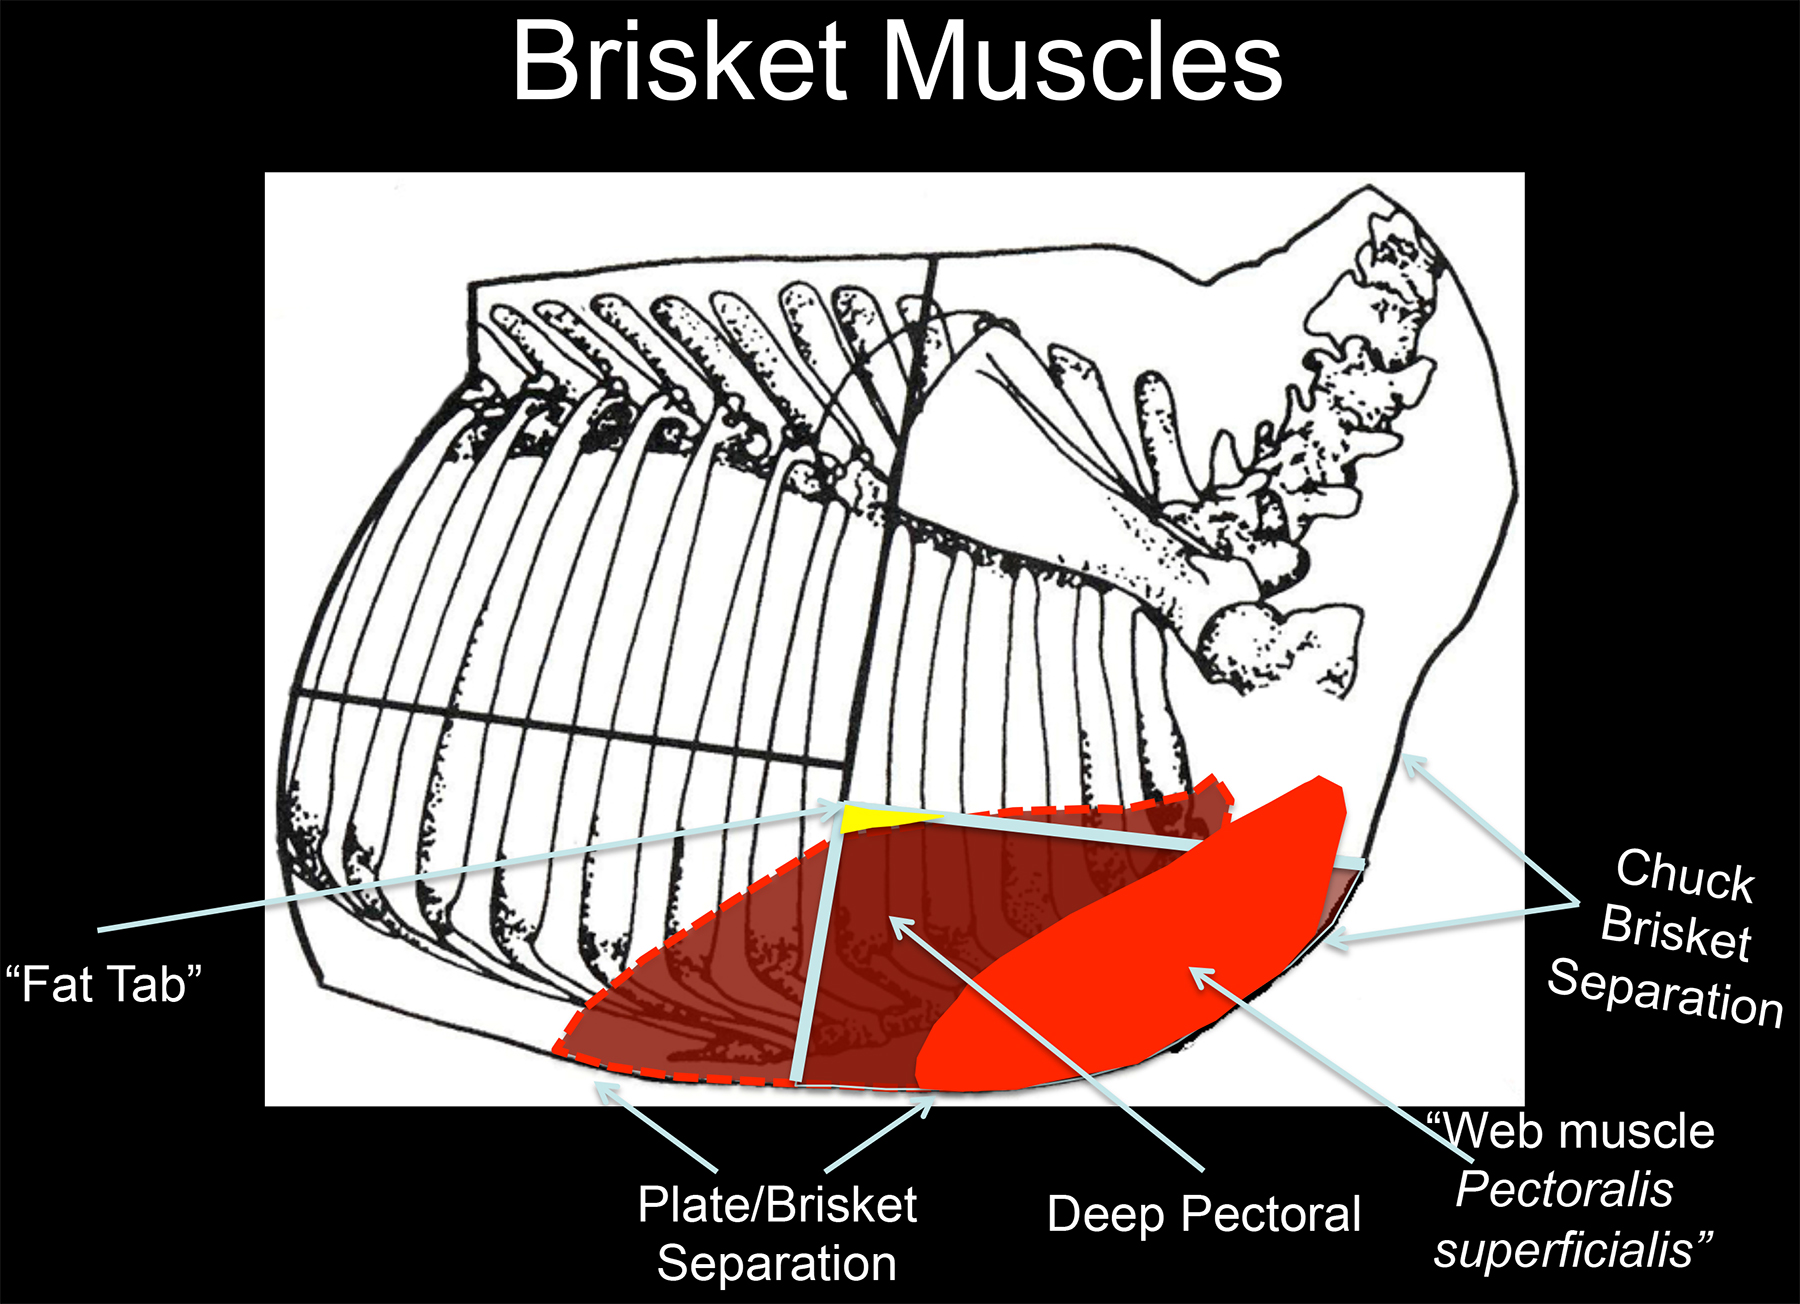 Skeletal Diagram of a Beef forequarter showing where the brisket is located.